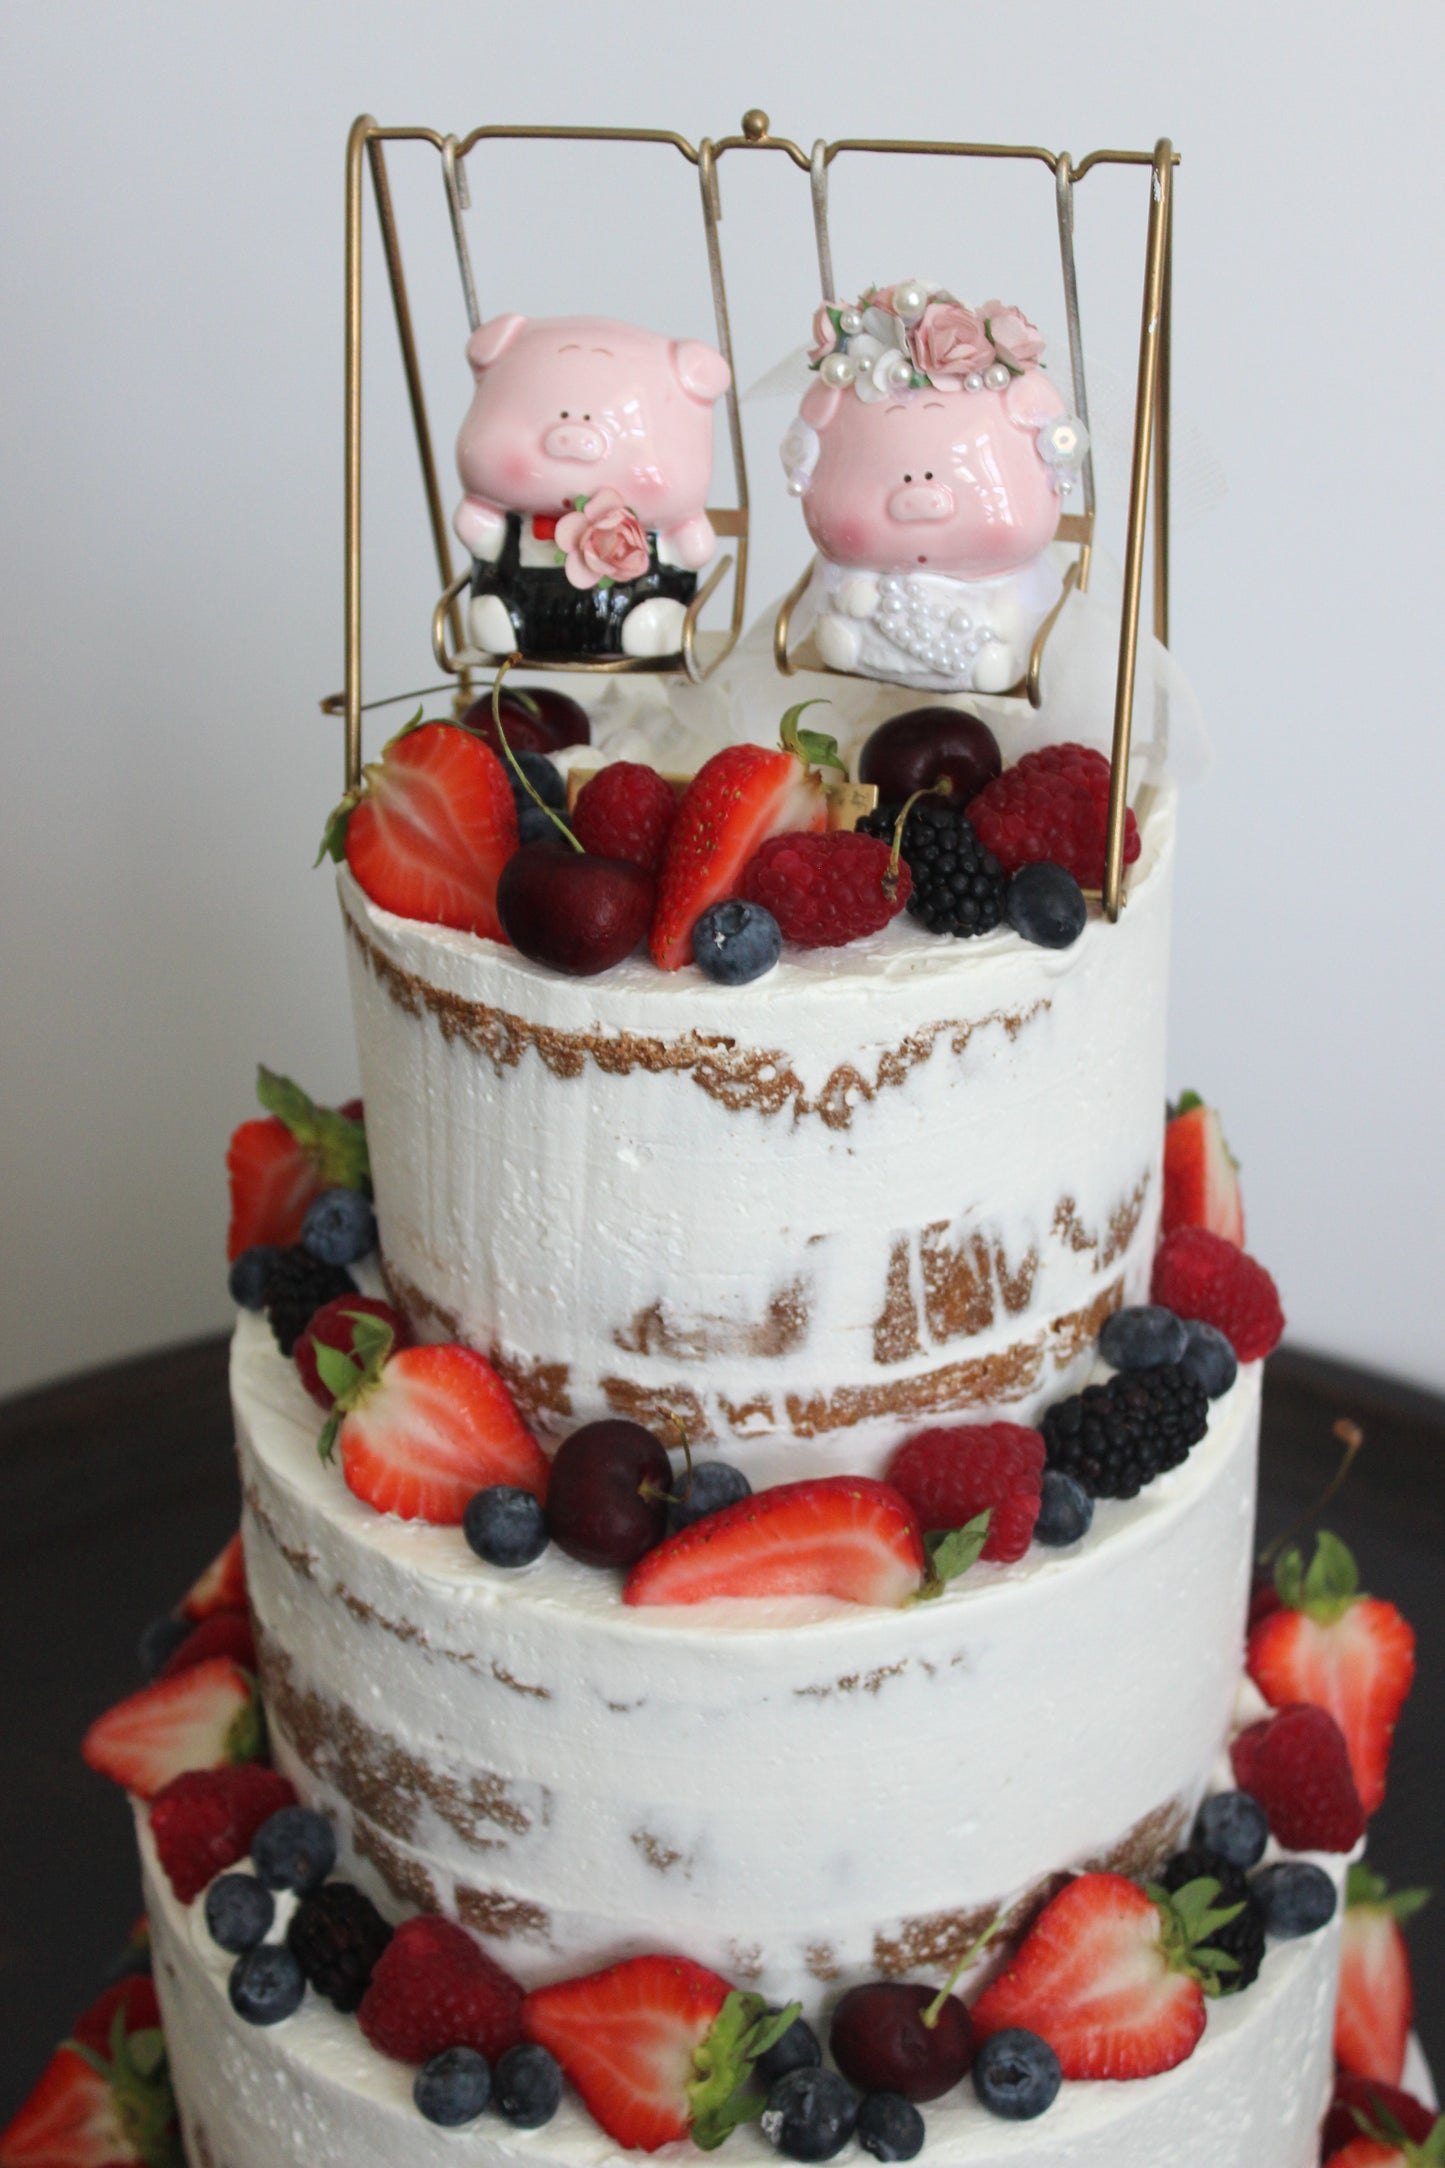 3 Tier Semi Naked with Berries & Pigs